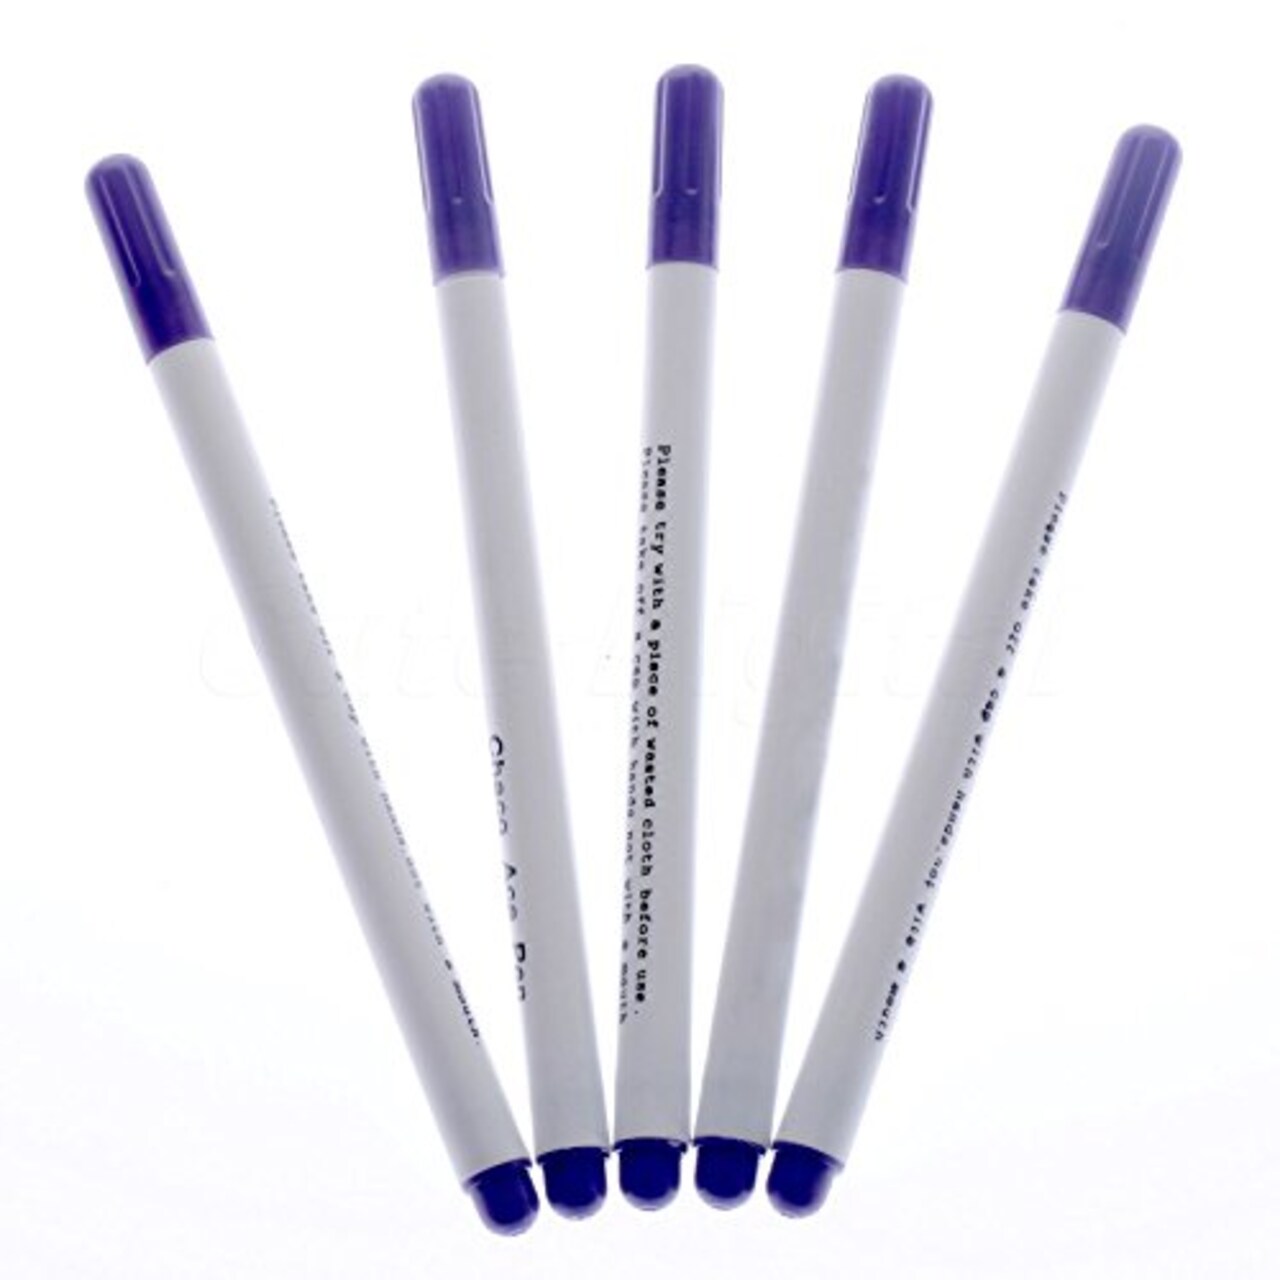 12 PACK Disappearing Ink Marking Pen, Air Water Erasable Pen/ Fabric Marker/  Temporary Marking/ Auto-Vanishing Pen for Cloth (Purple)